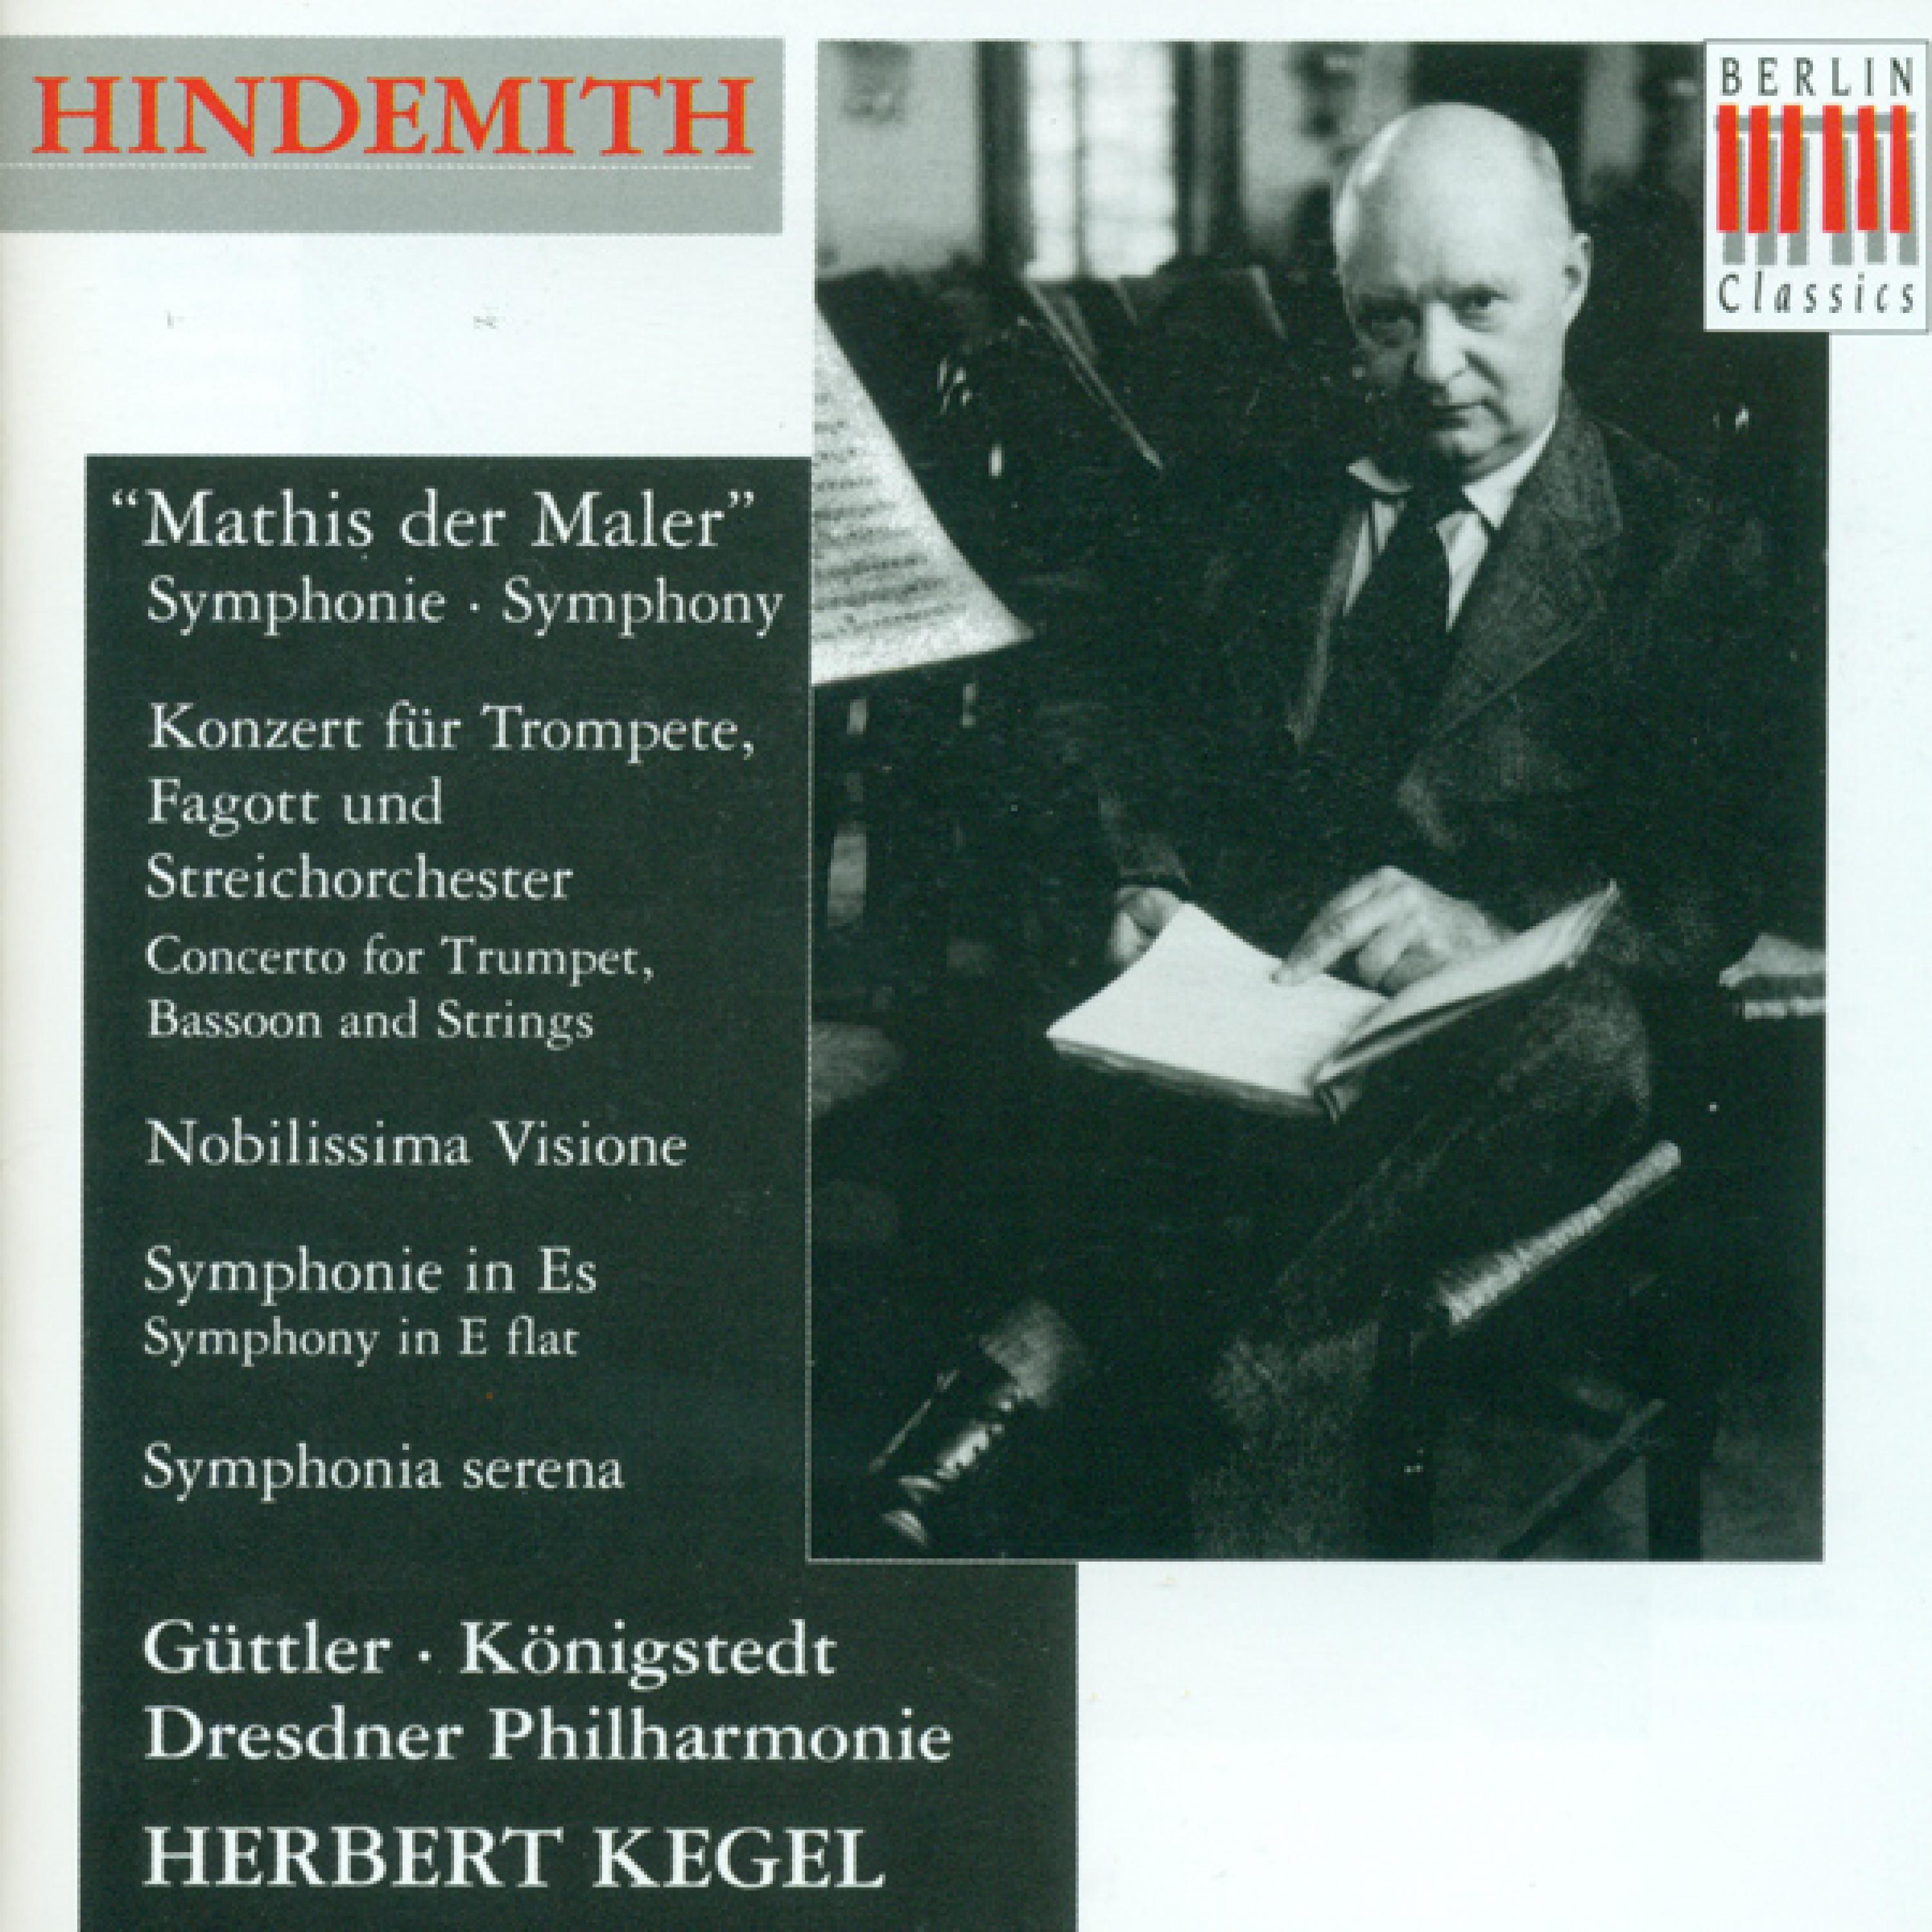 Hindemith: Symphony "Mathis der Maler", Concerto for Trumpet, Bassoon and Strings, Nobilissima Visione, Symphony in E-Flat Major & Symphonia Serena